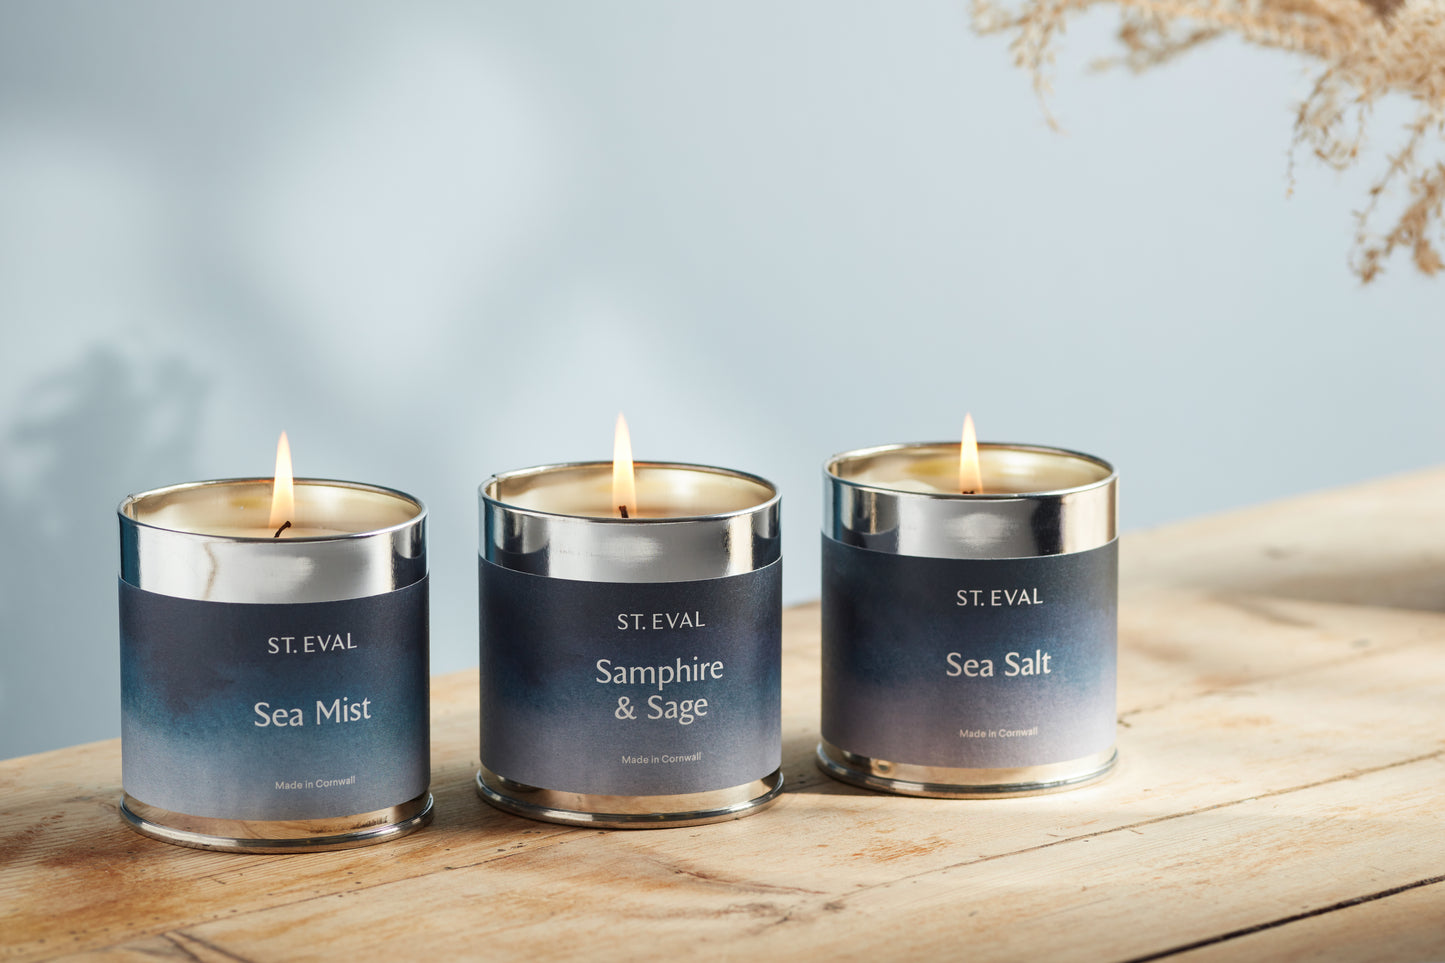 St Eval Sea Mist Scented Tin Candle